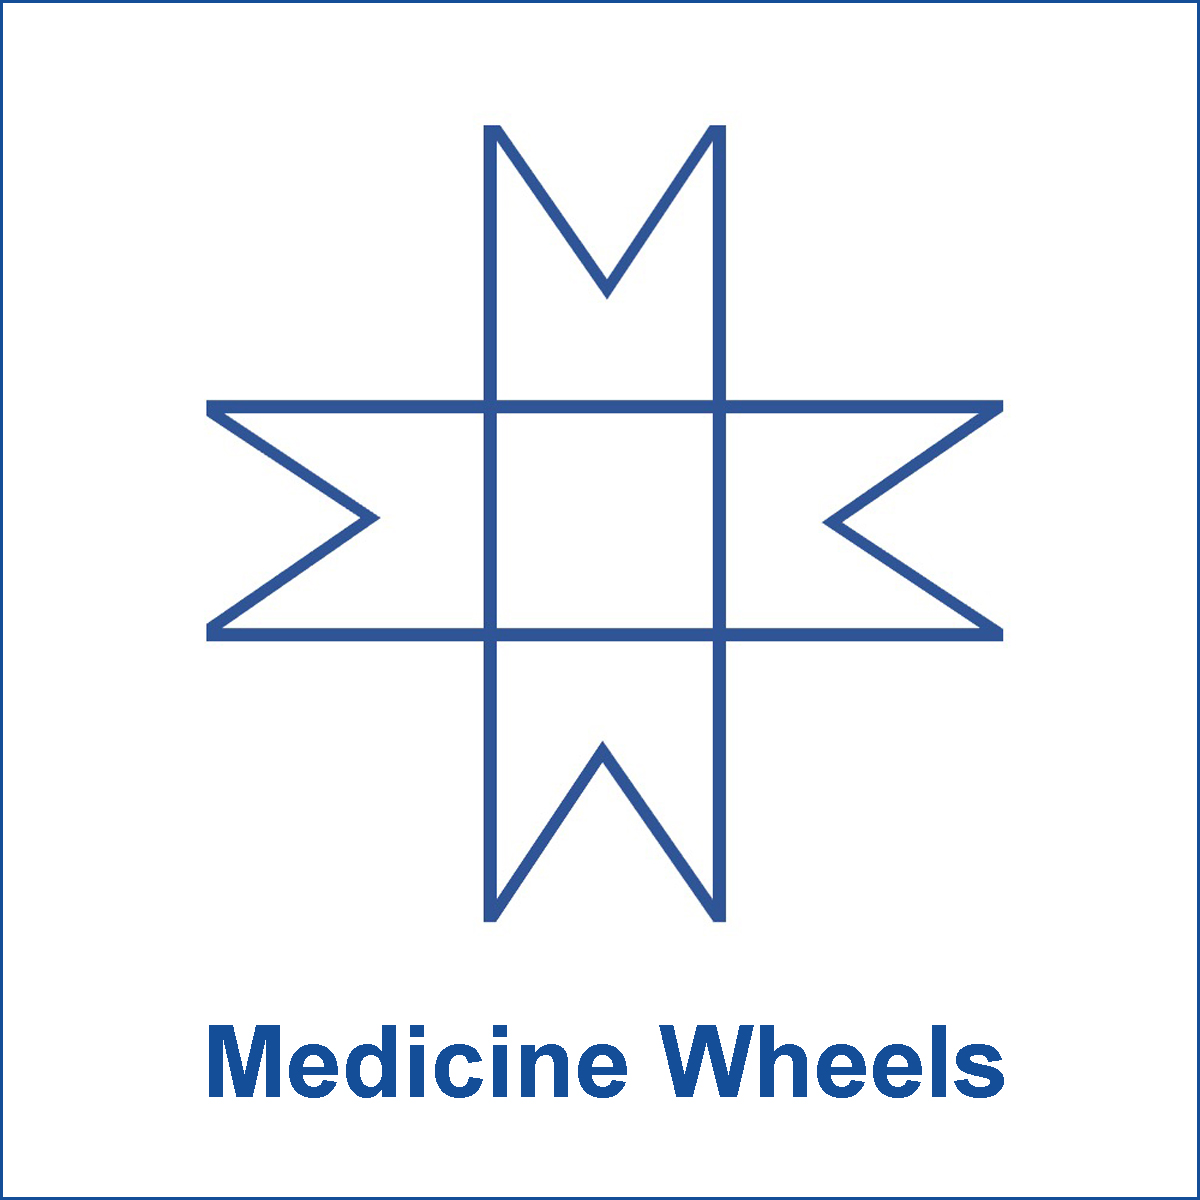 Artwork for the section on Indigenous Medicine Wheels in the Saagajiwe Indigenous Knowledges Open Source Encylopedia